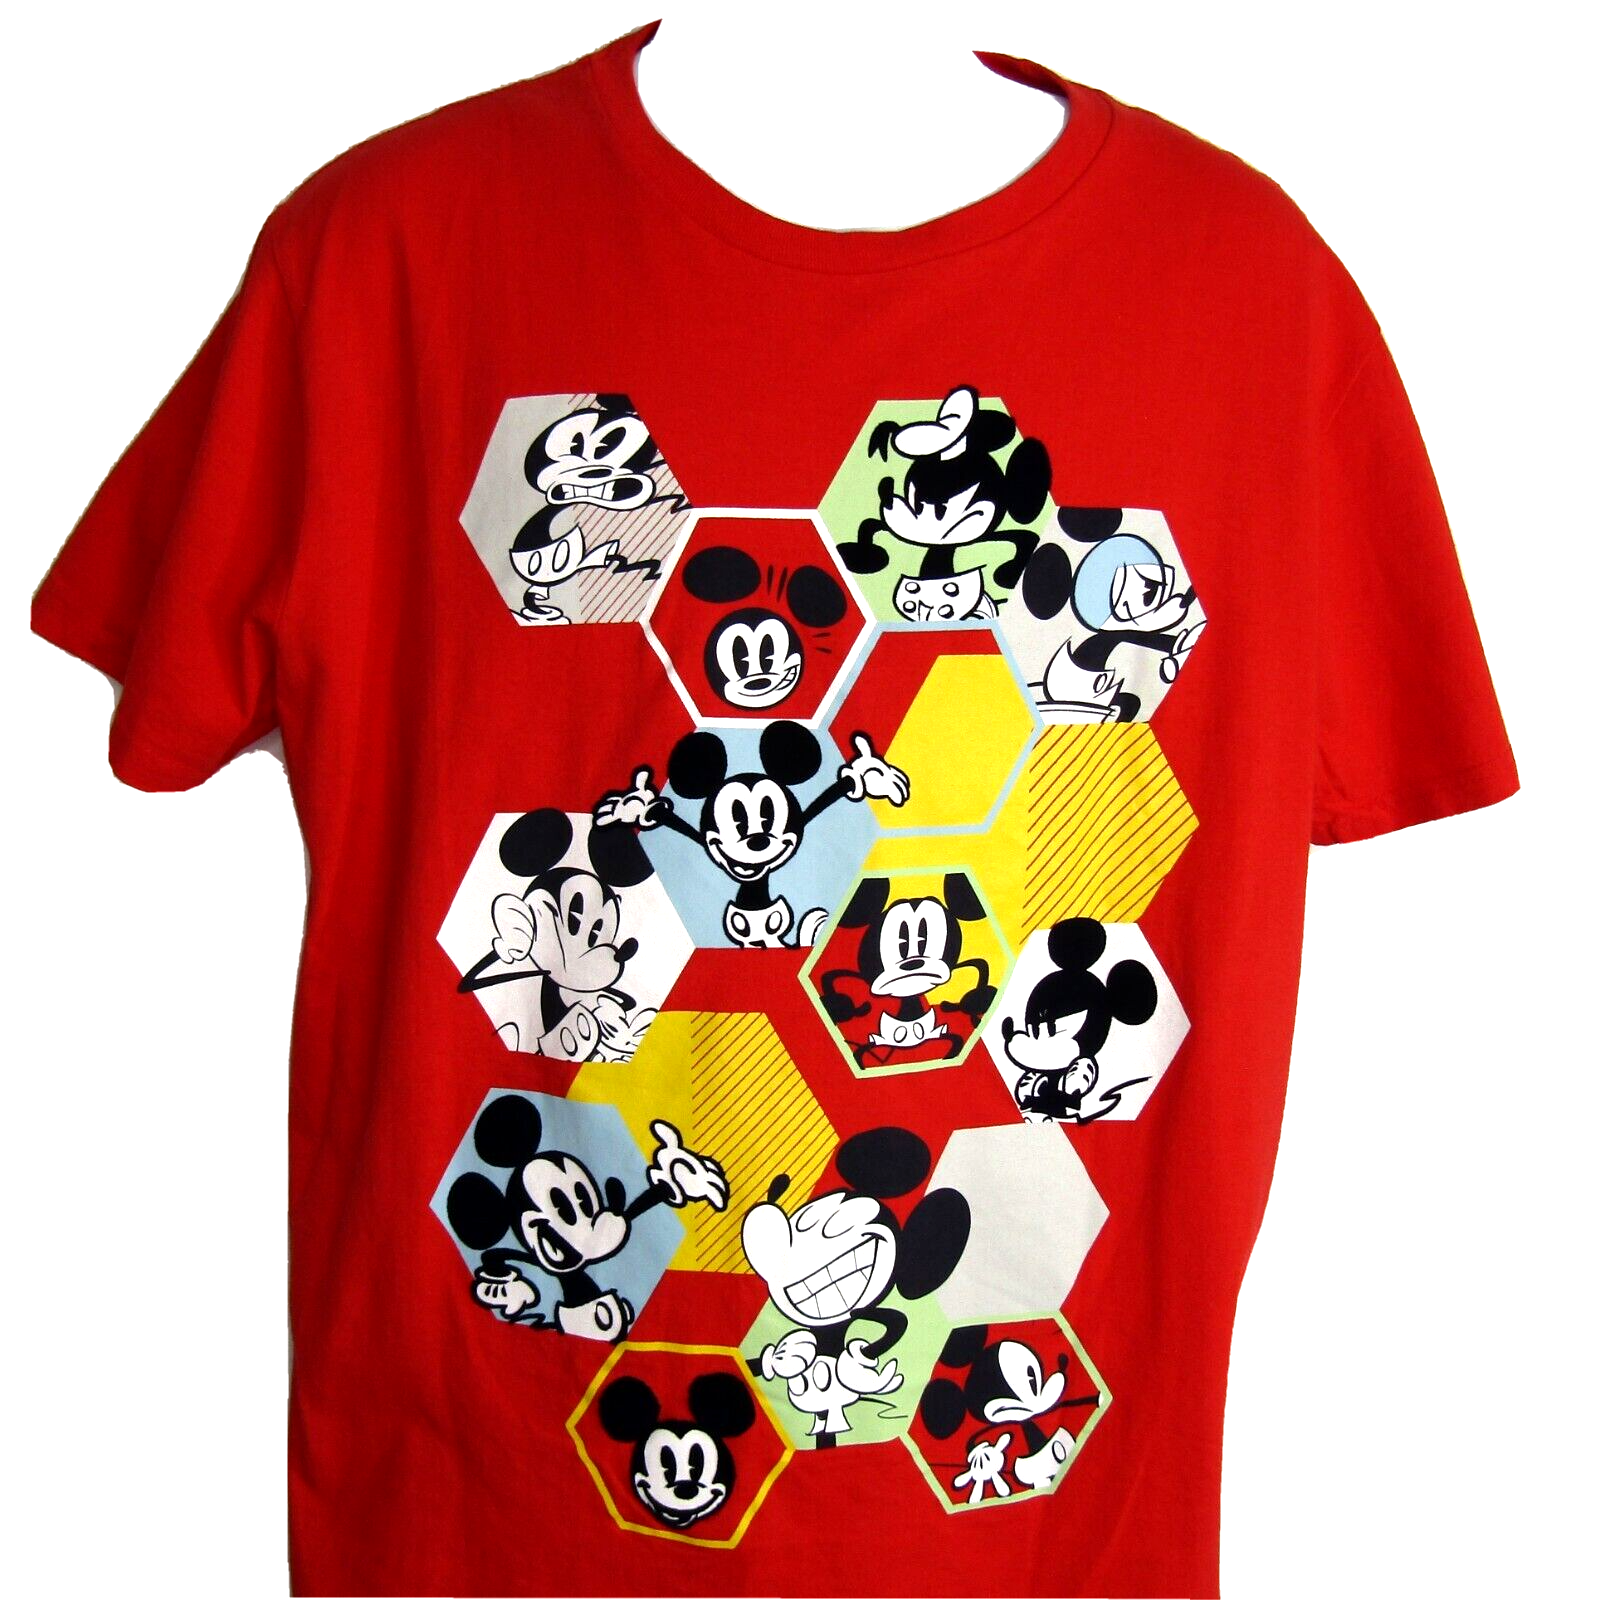 Primary image for Disney Store Mickey Mouse Expressions Cartoon Flocking Red T-Shirt Size Large